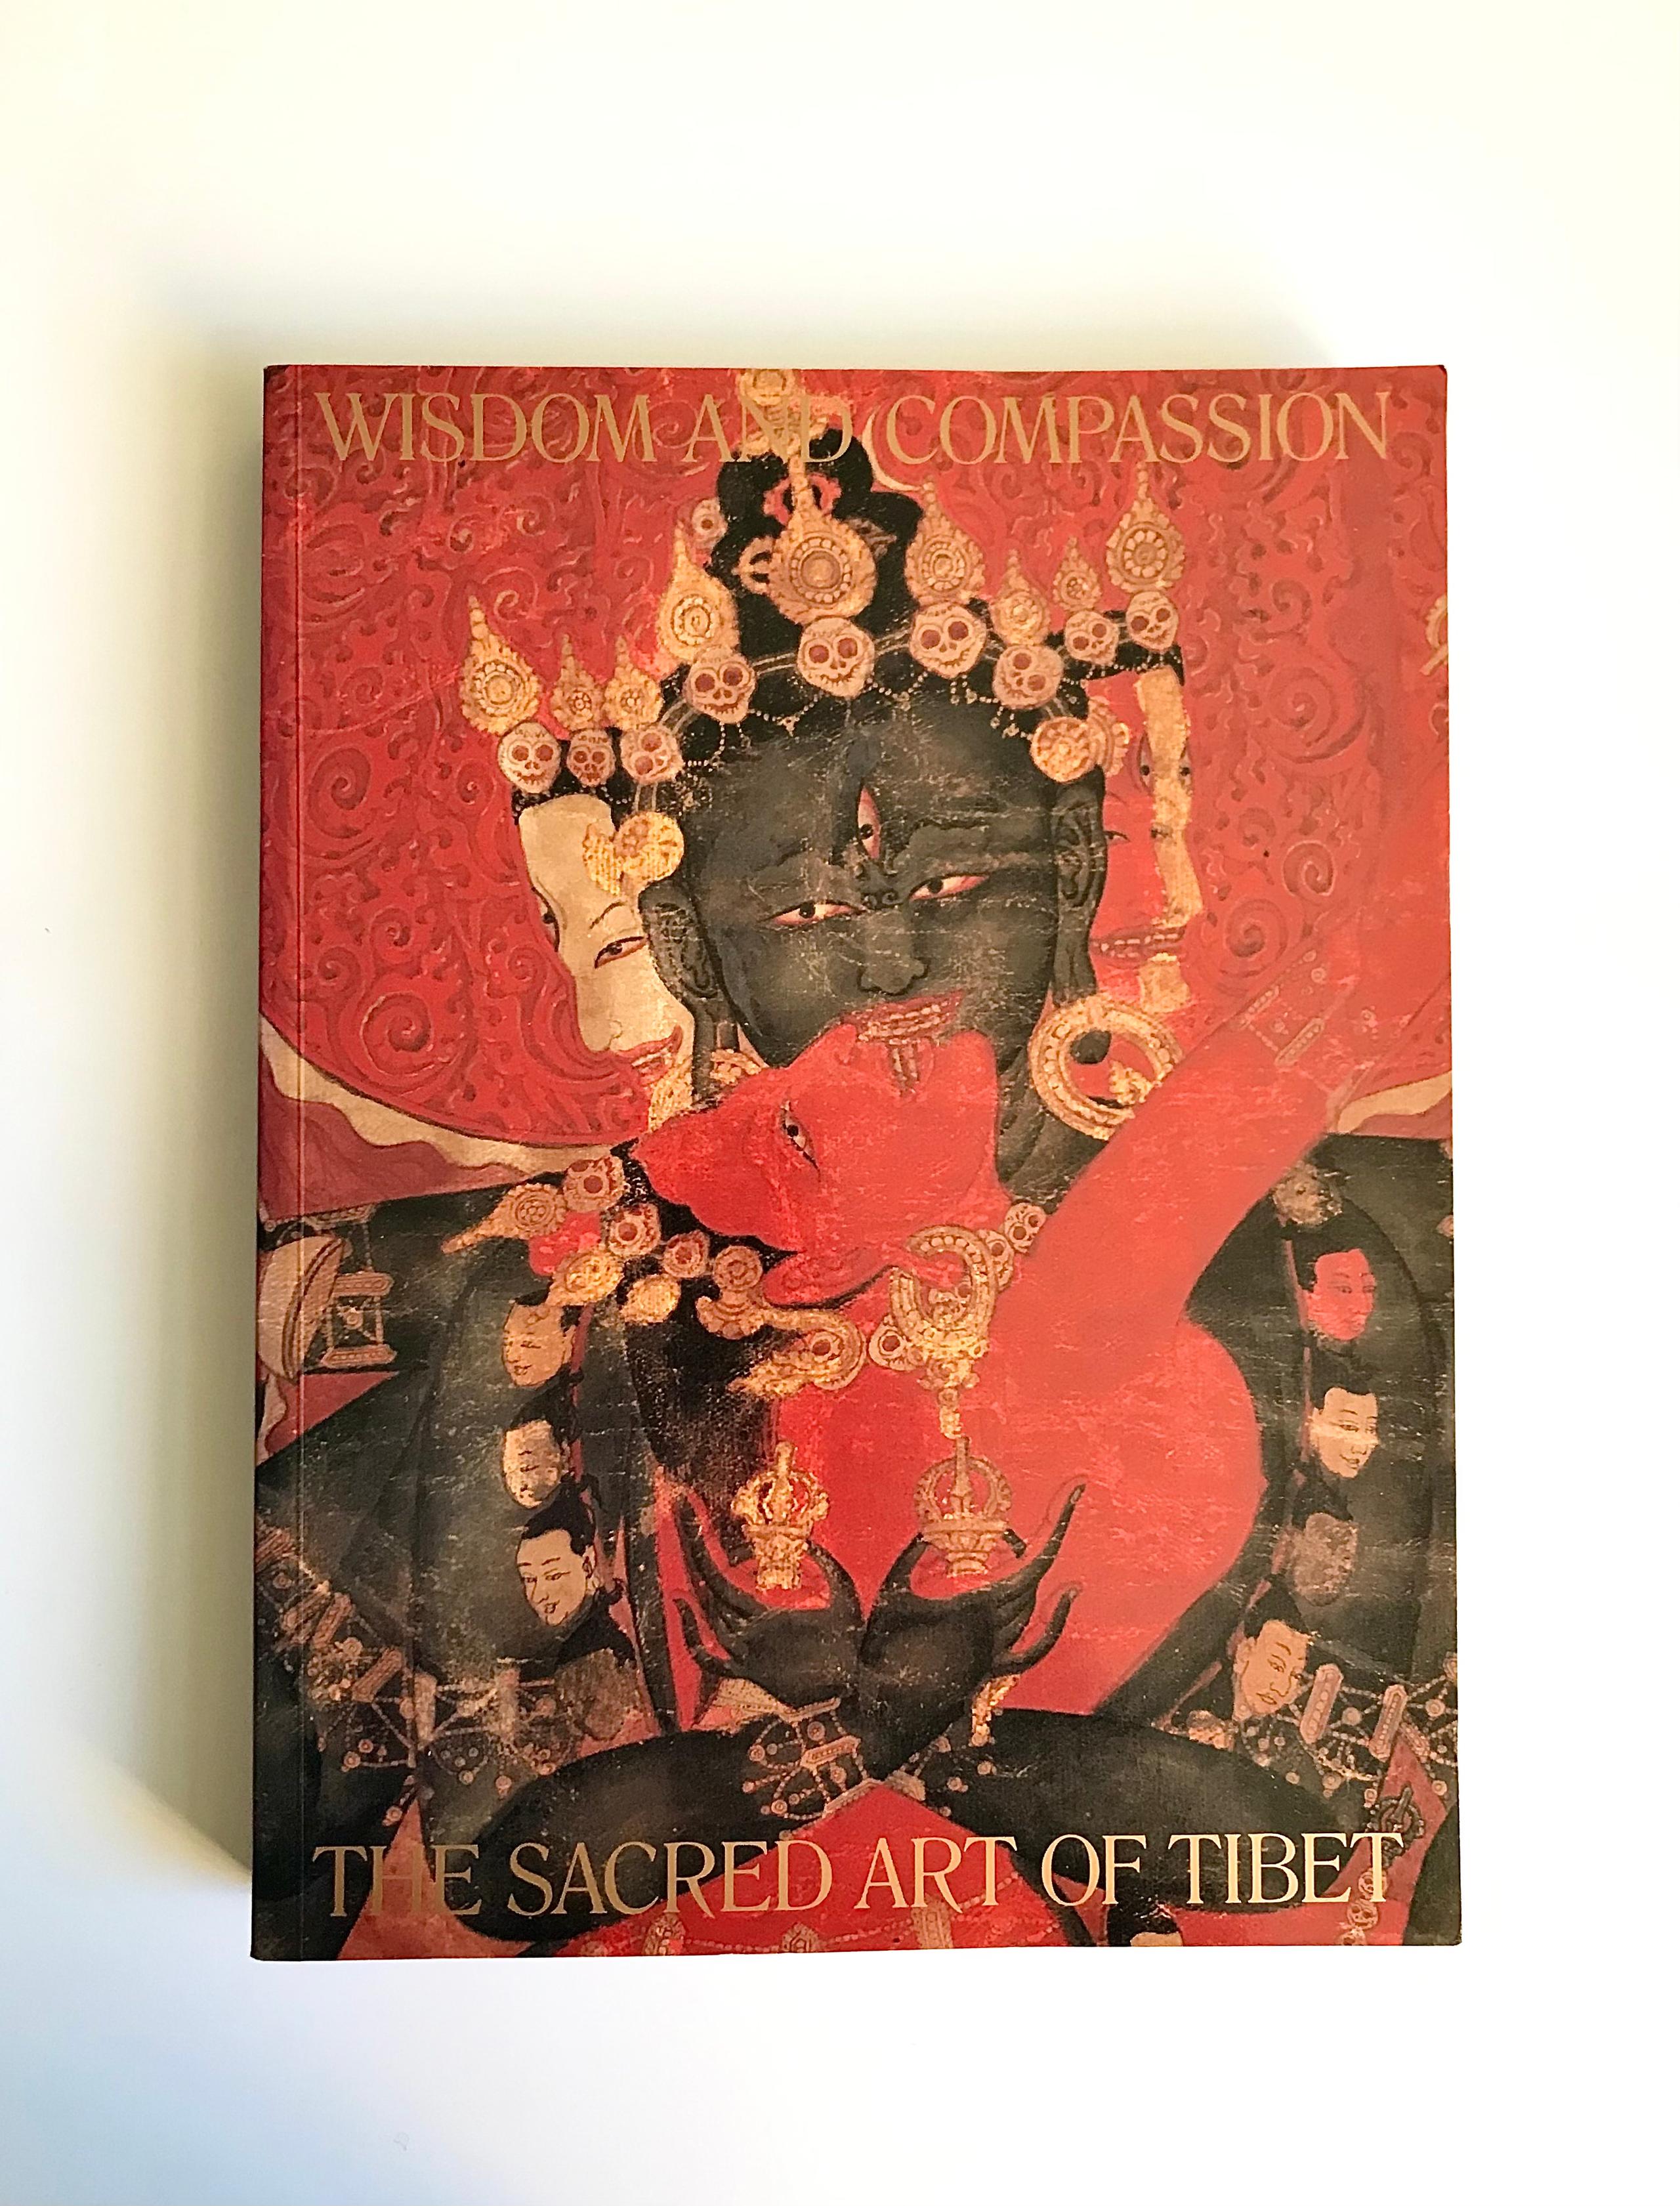 Wisdom And Compassion: The Sacred Art of Tibet